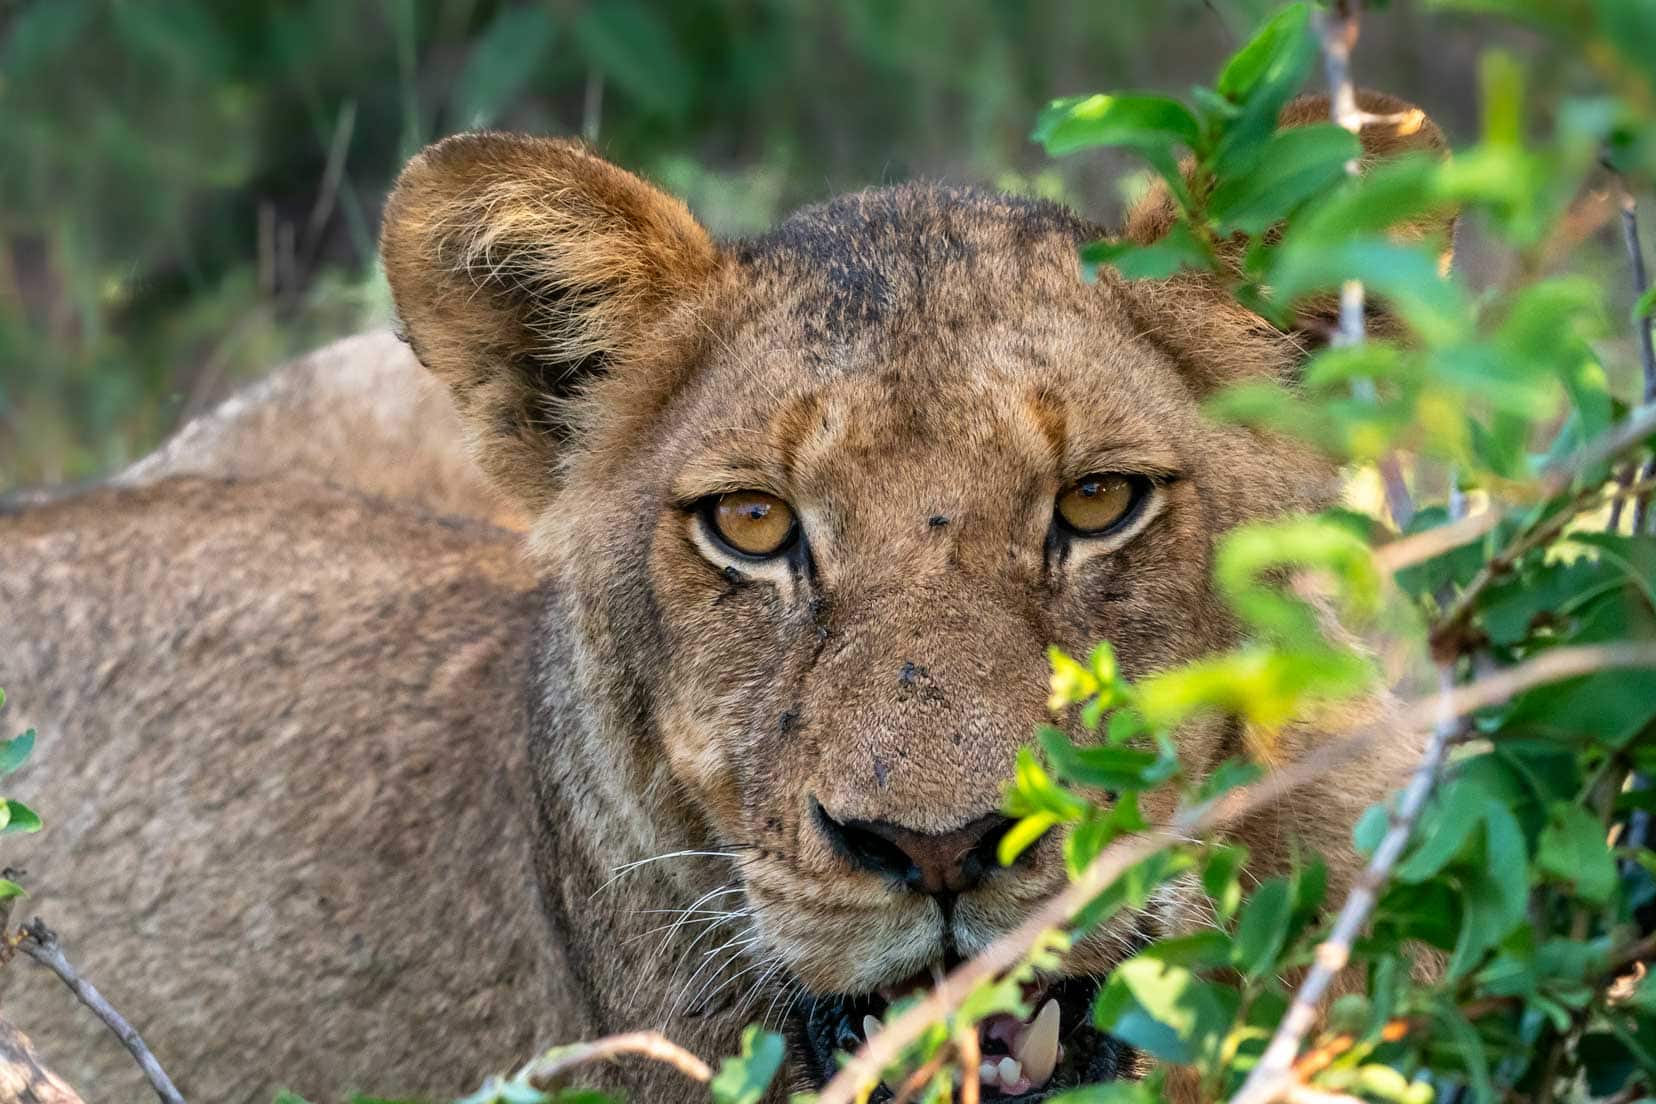 Lioness giving a hard stare at camera